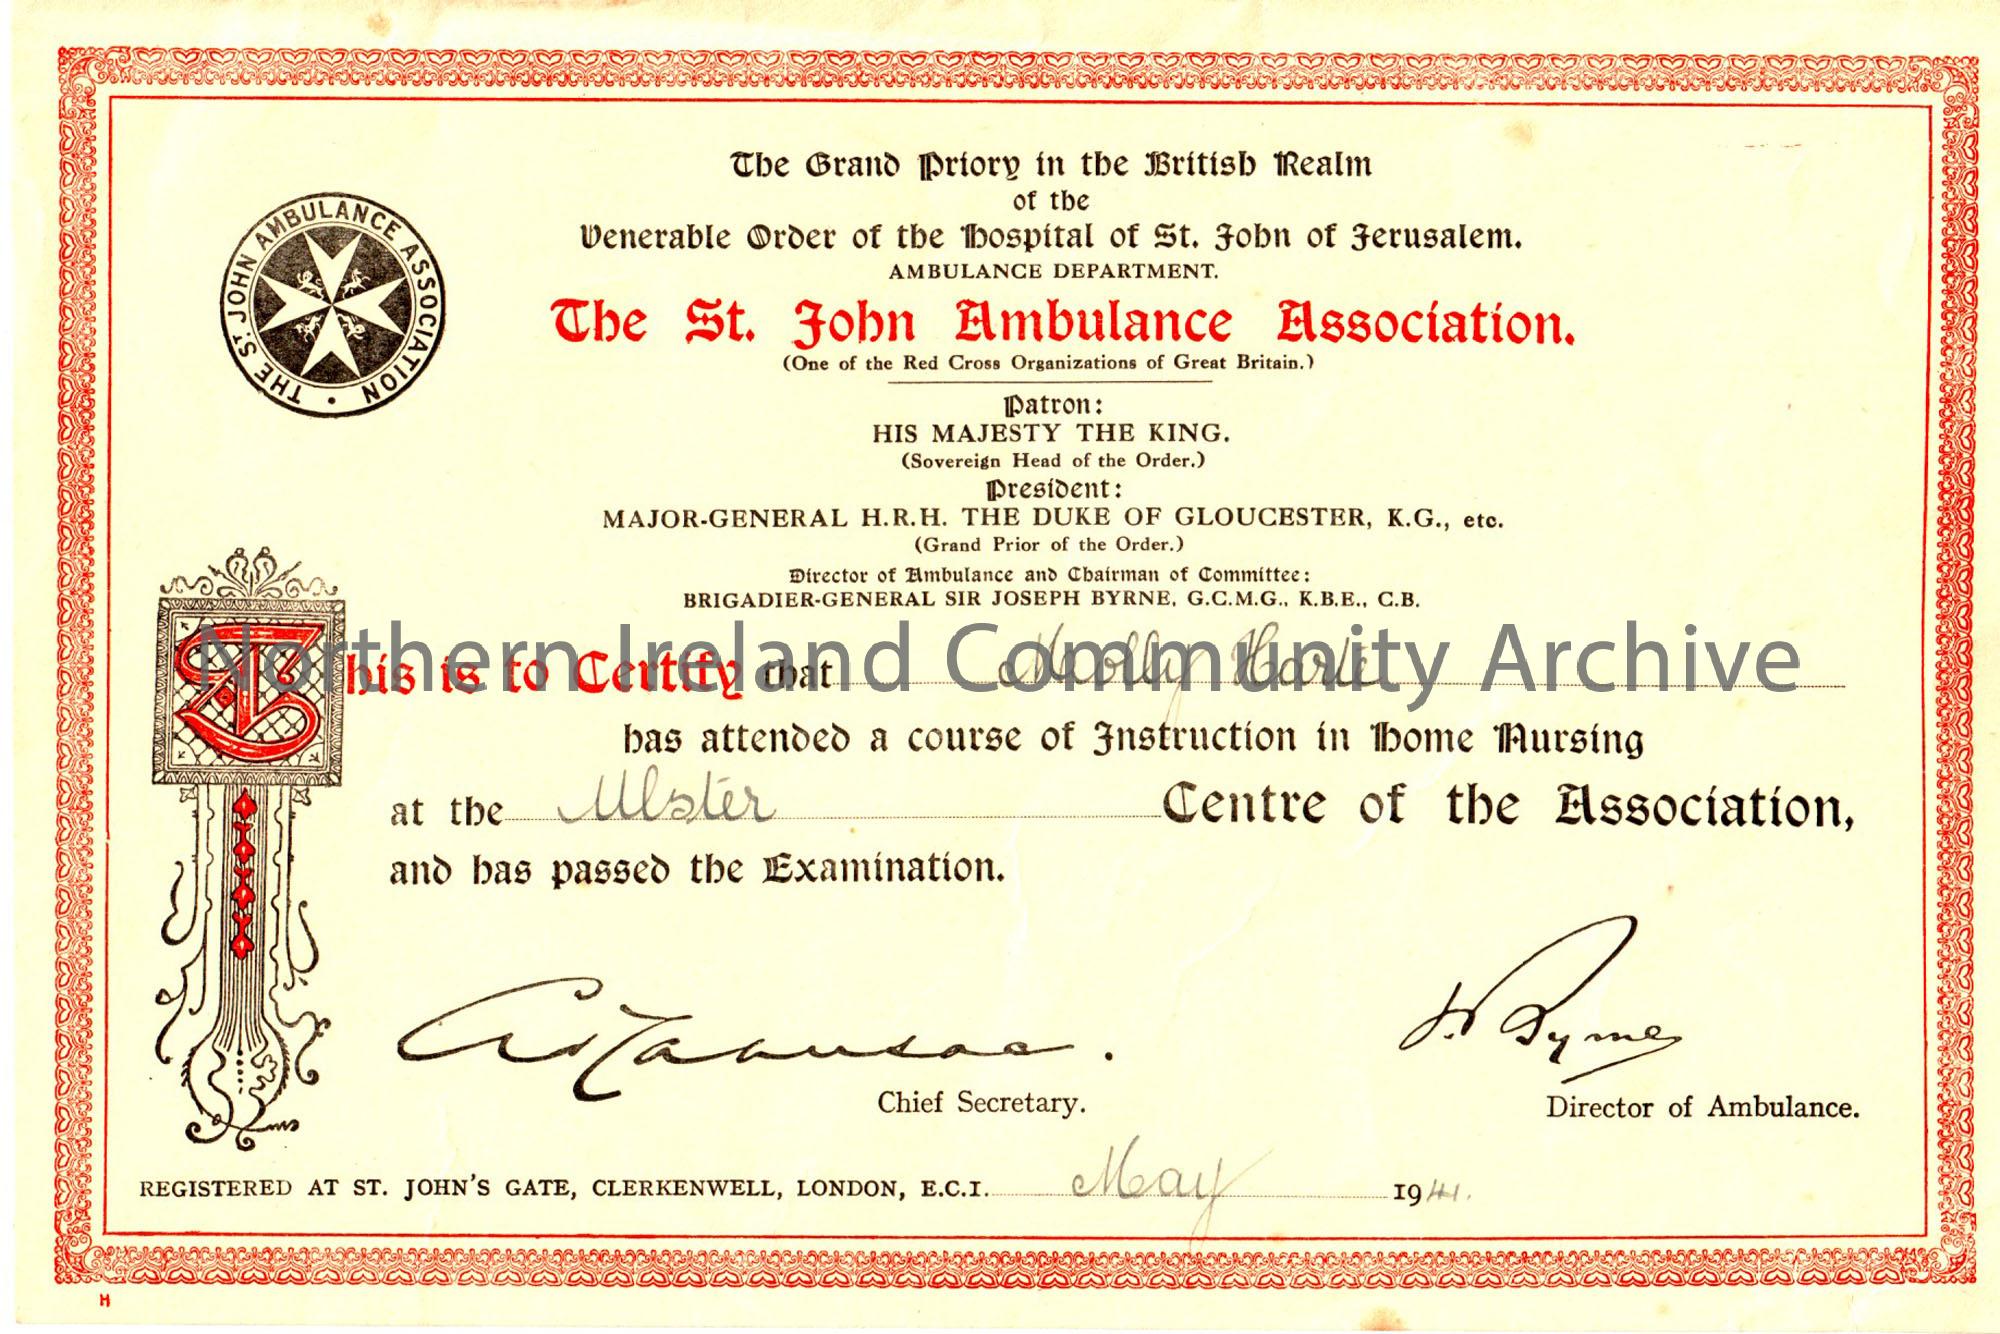 ‘Instruction in Home Nursing’, awarded to Molly Hart by the St. John Ambulance Association.